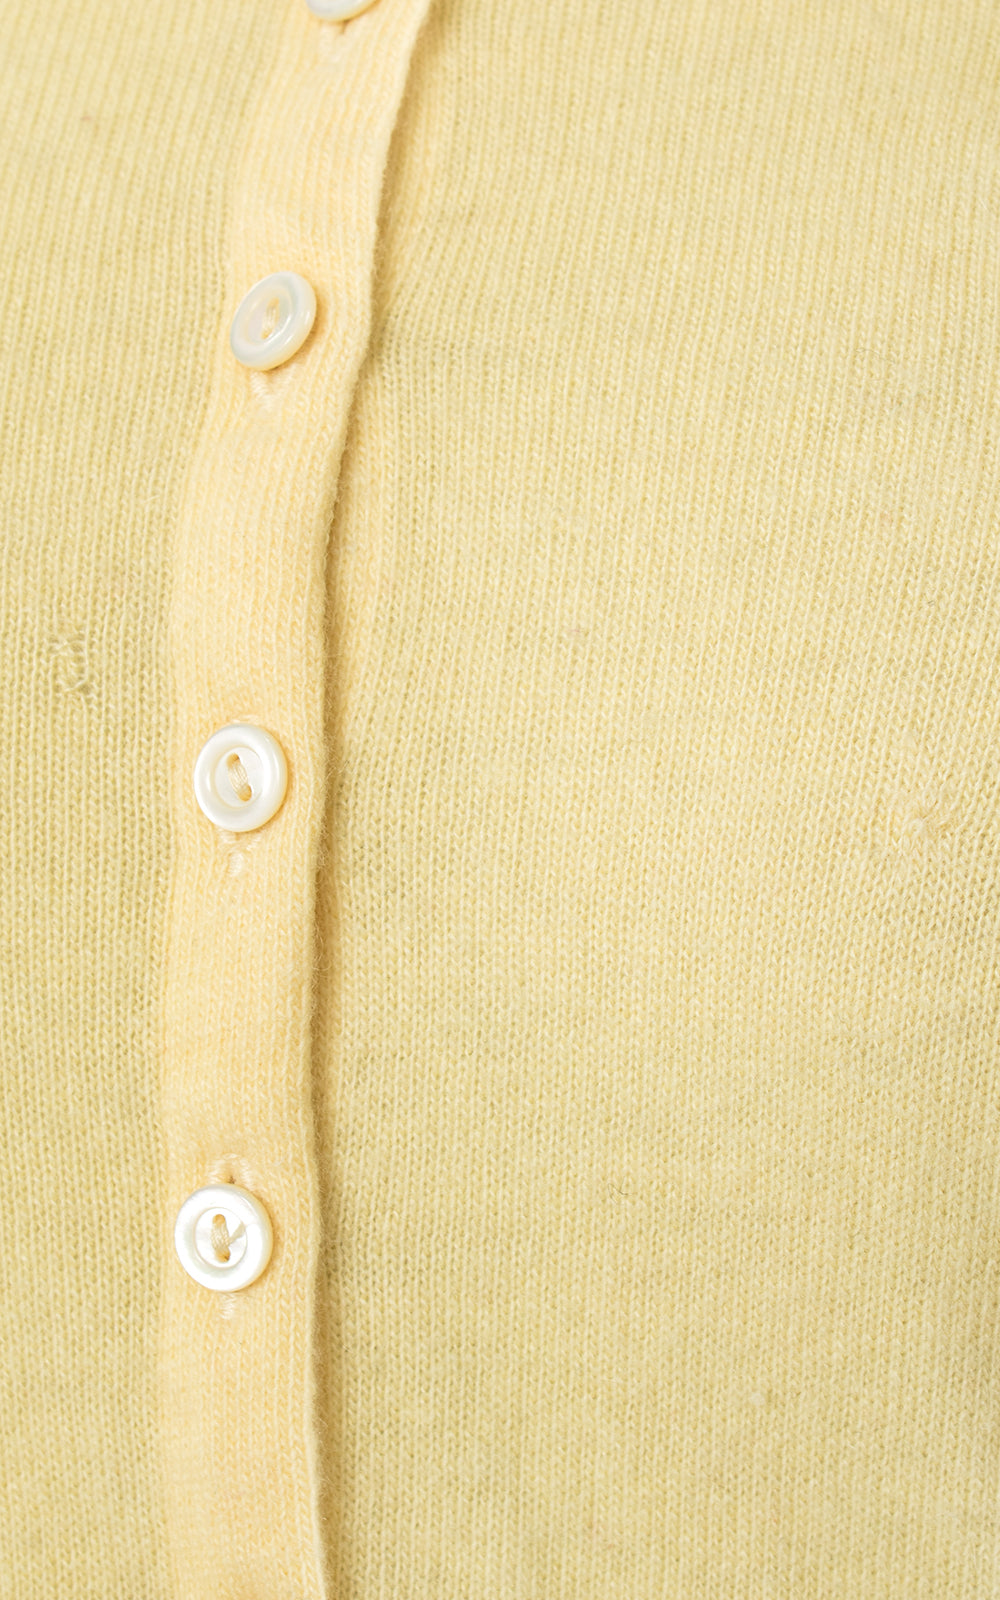 1950s Floral Appliqué Cashmere Knit Yellow Cardigan Top | x-small/small/medium